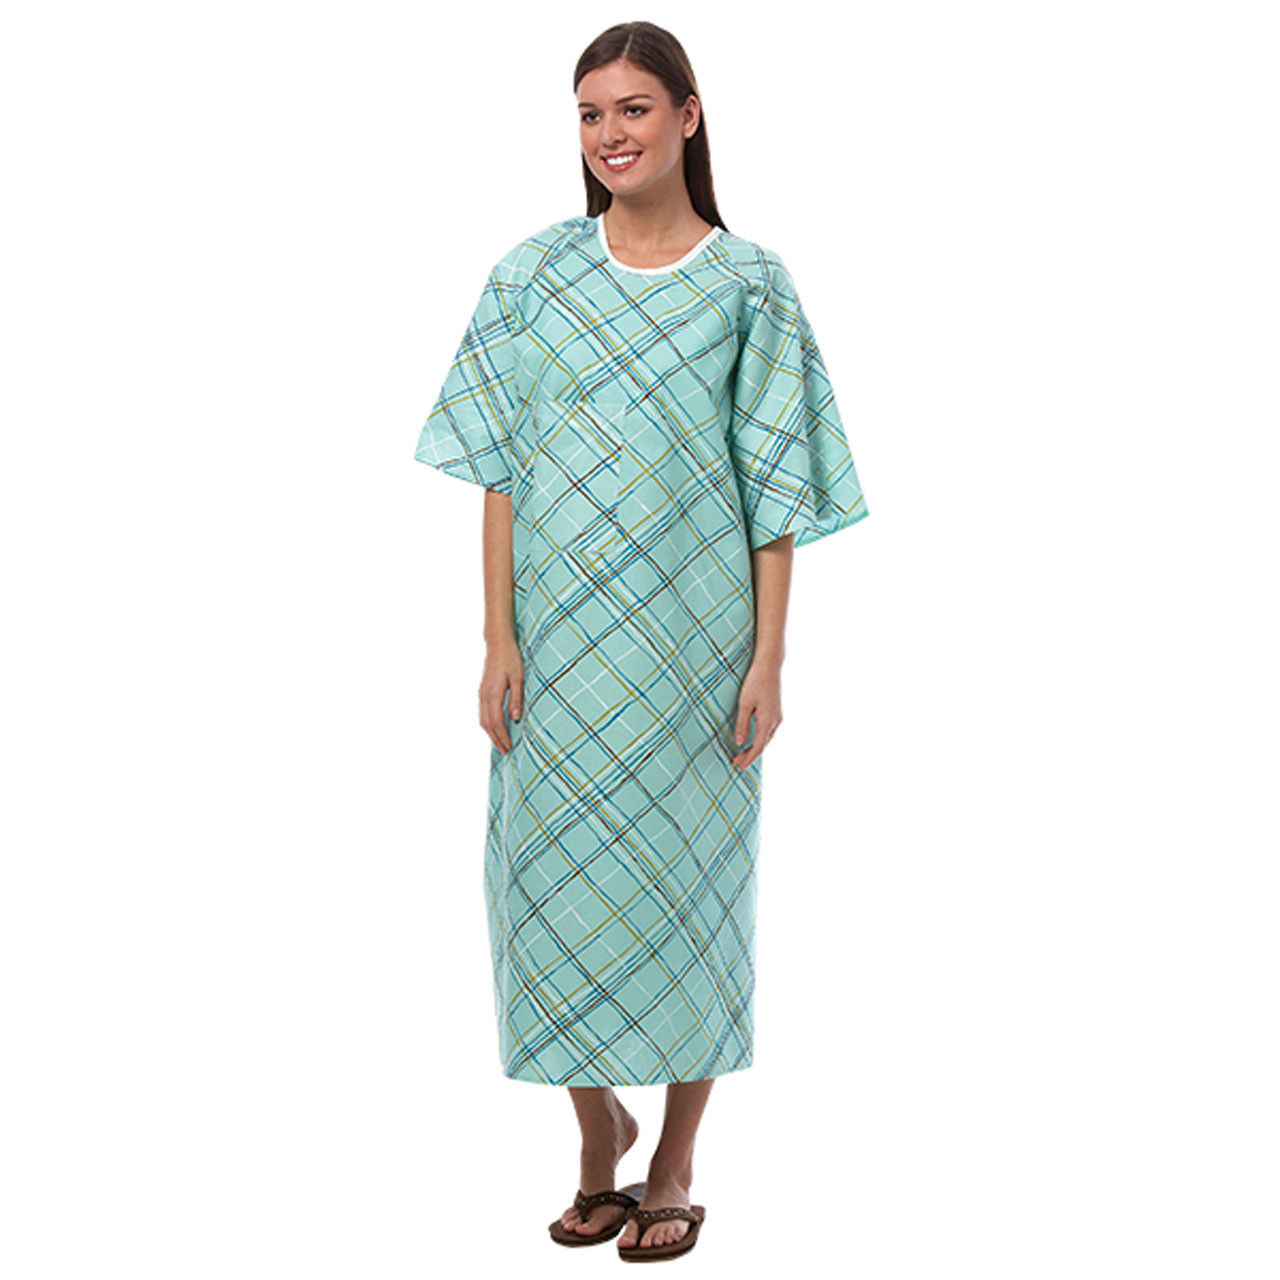 Does this hospital gown provide full coverage for the patient?